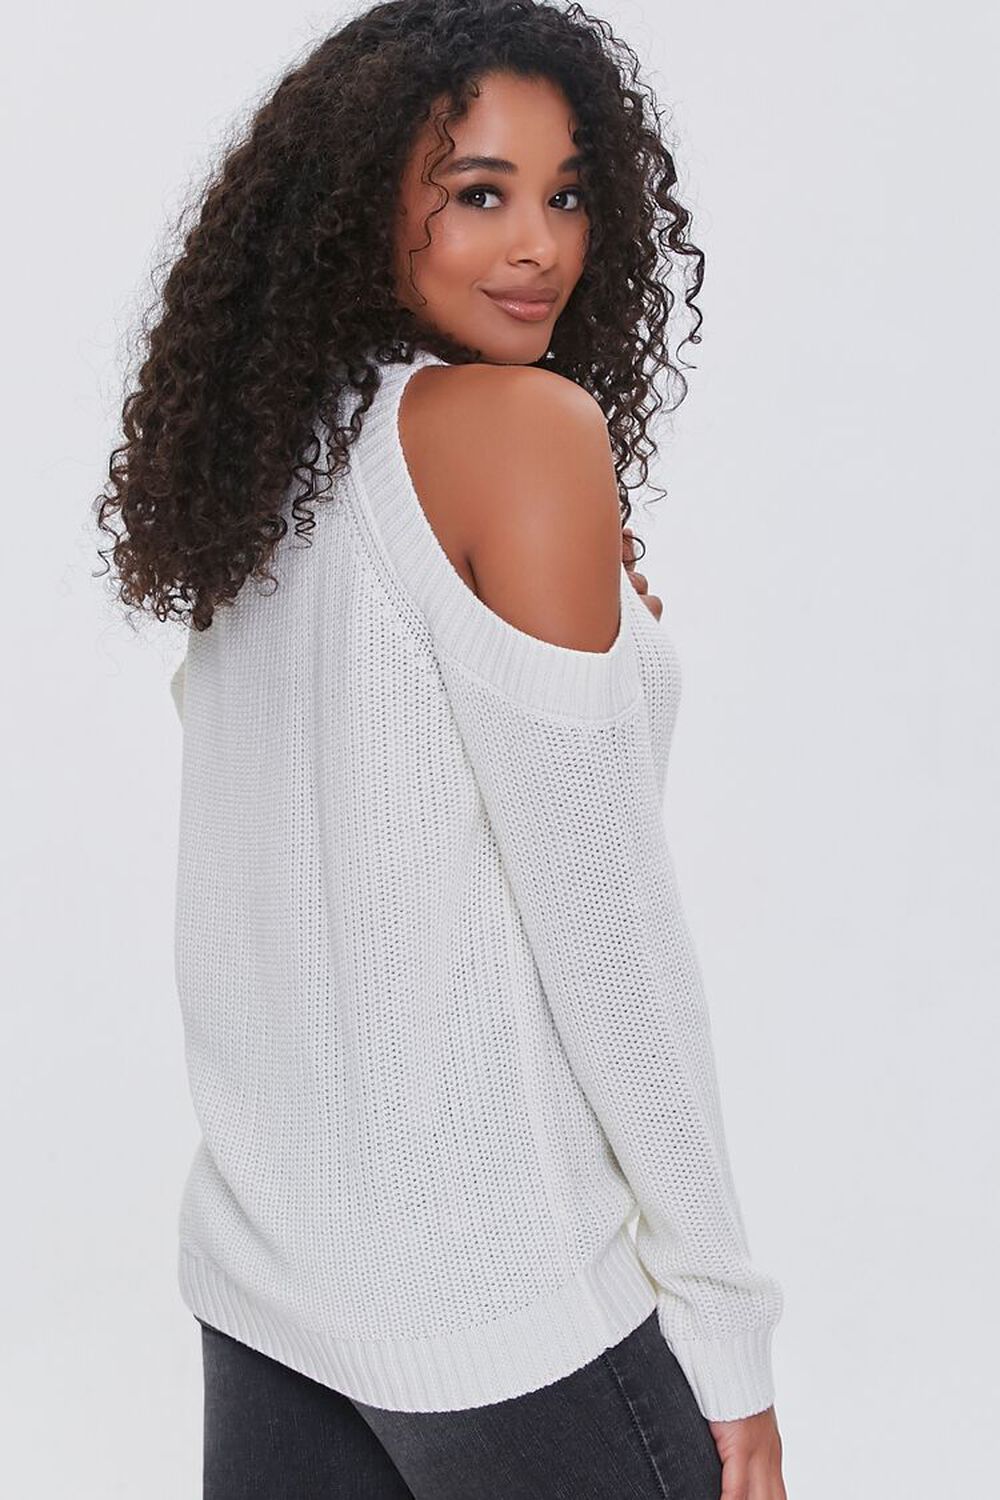 CREAM Ribbed Open-Shoulder Sweater, image 2